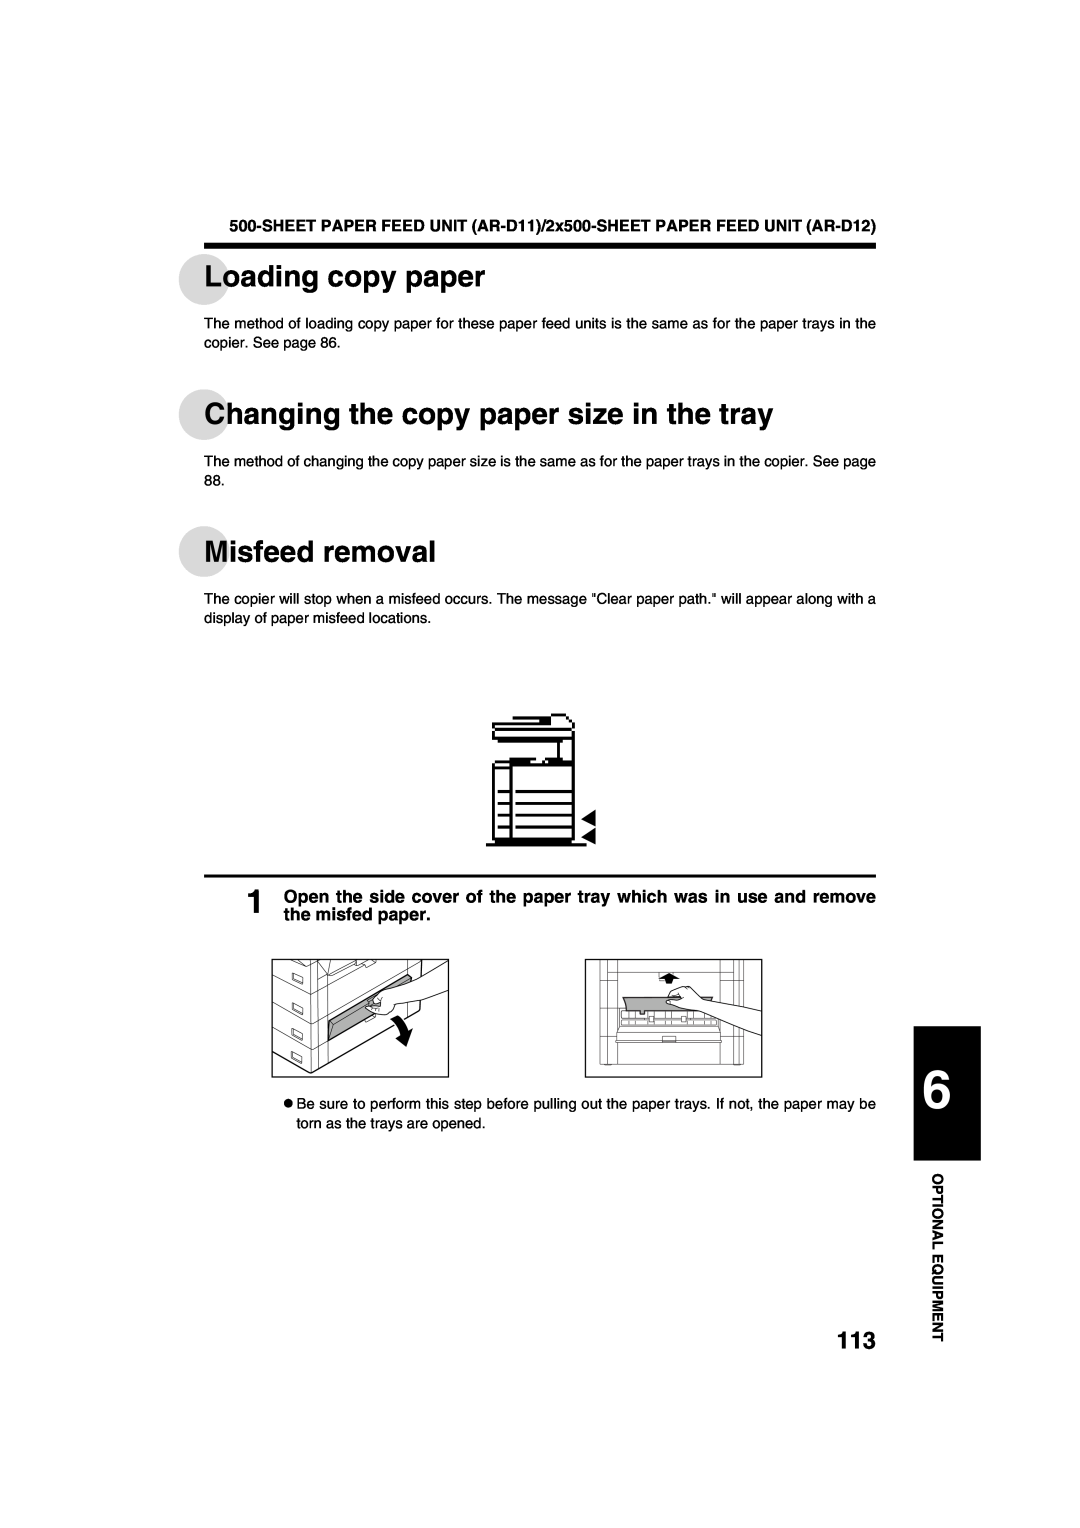 Sharp AR-M208 Open the side cover of the paper tray which was in use and remove, the misfed paper, Loading copy paper 